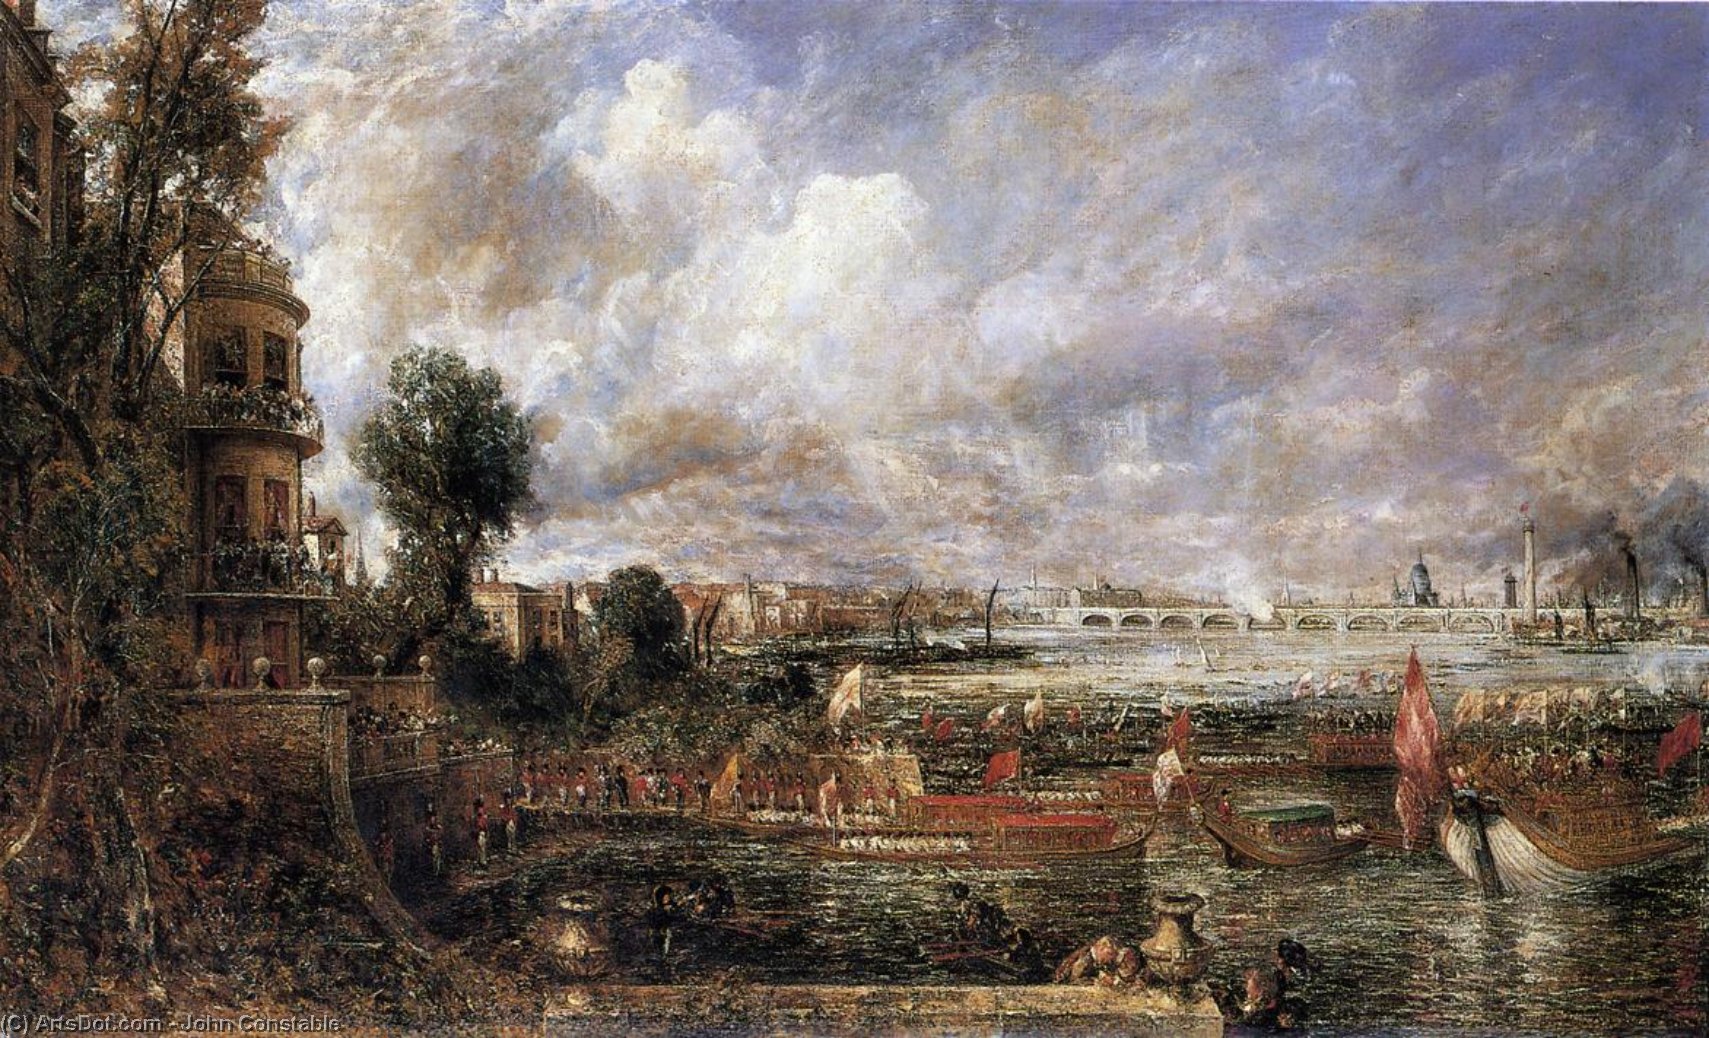 Order Art Reproductions The Opening of Waterloo Bridge seen from Whitehall Stairs, June 18th 1817, 1832 by John Constable (1776-1837, United Kingdom) | ArtsDot.com